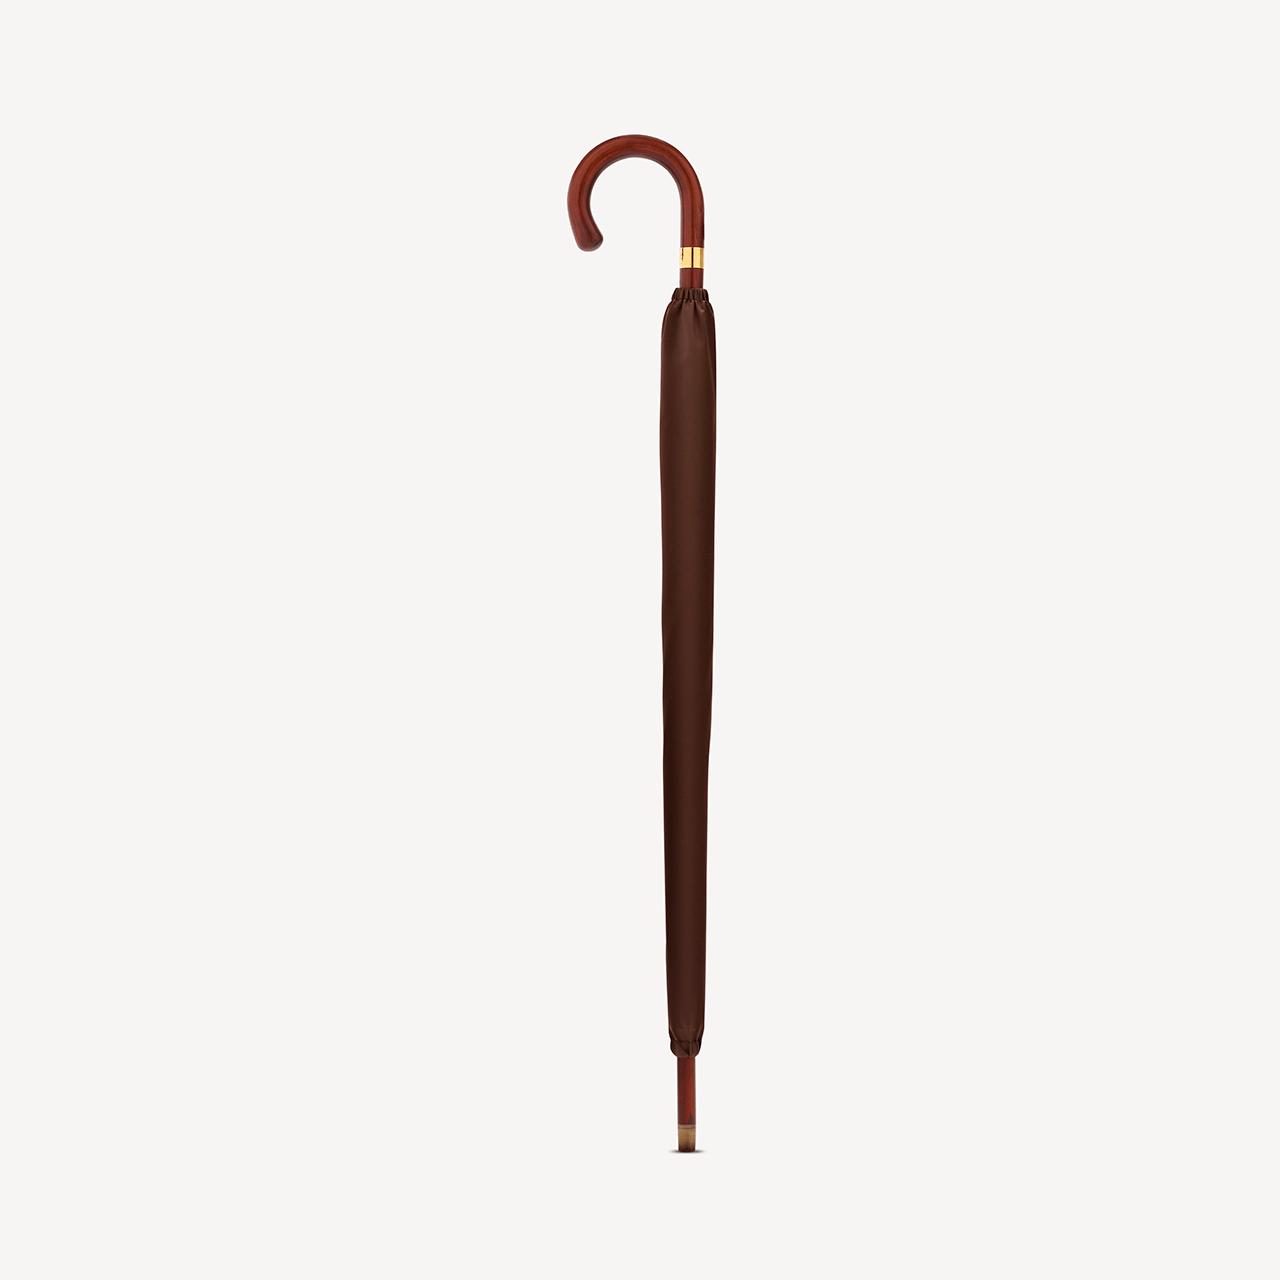 Stripped Cherry Umbrella for Men - Brown - Swaine